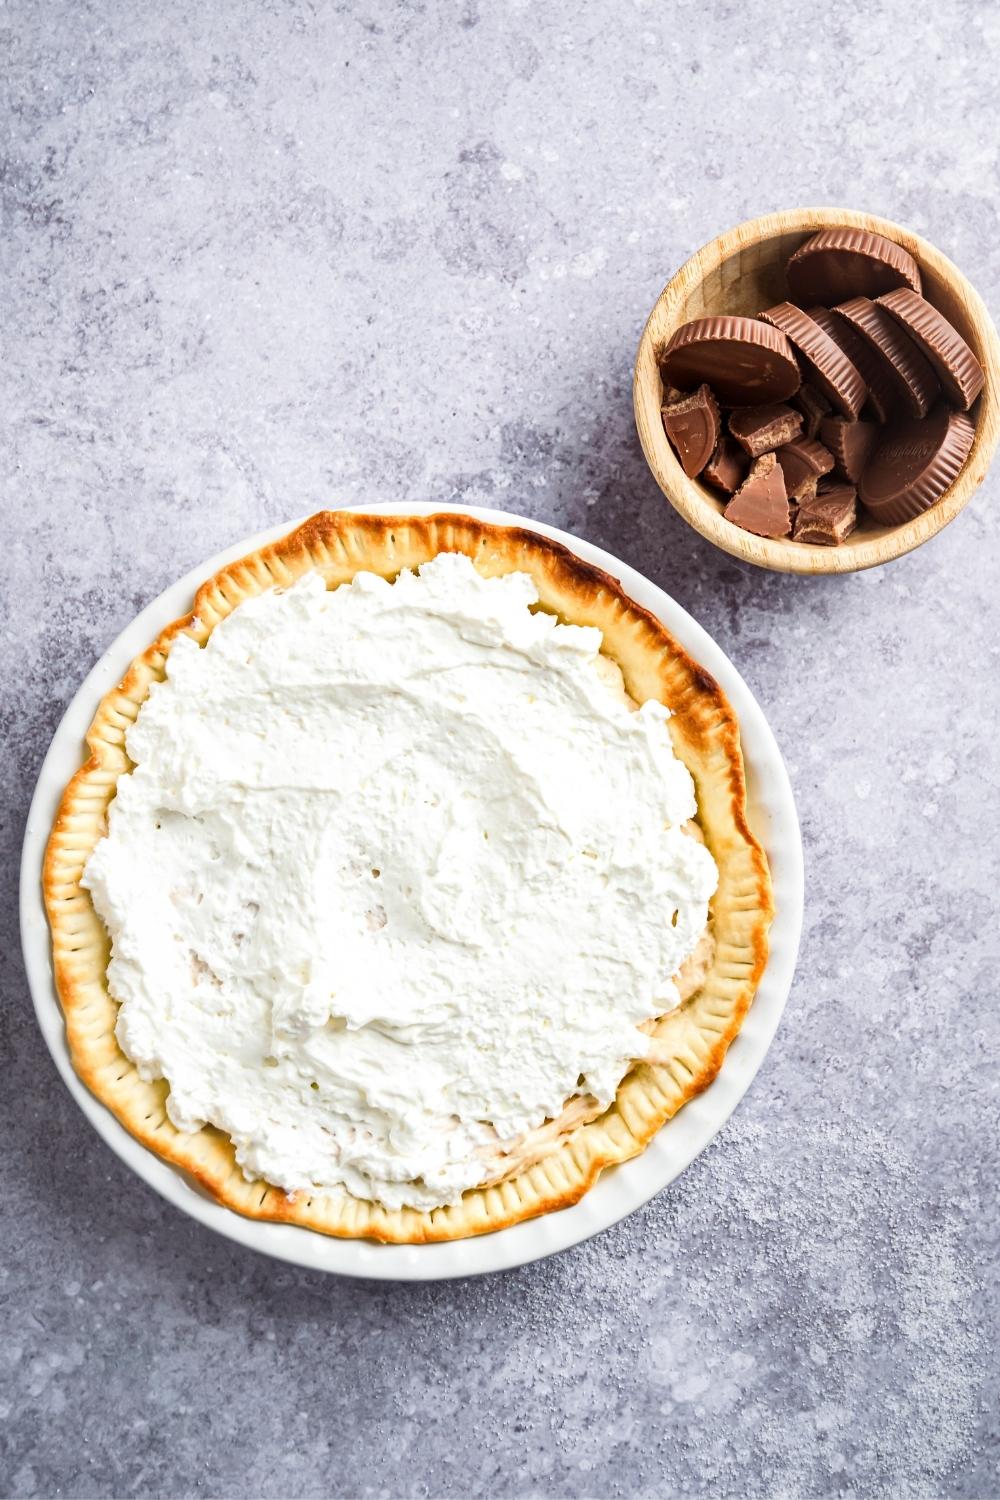 An overhead view of a Reeses pie topped with homemade whipped cream and a small bowl sits next to that with Reese's peanut butter cups.